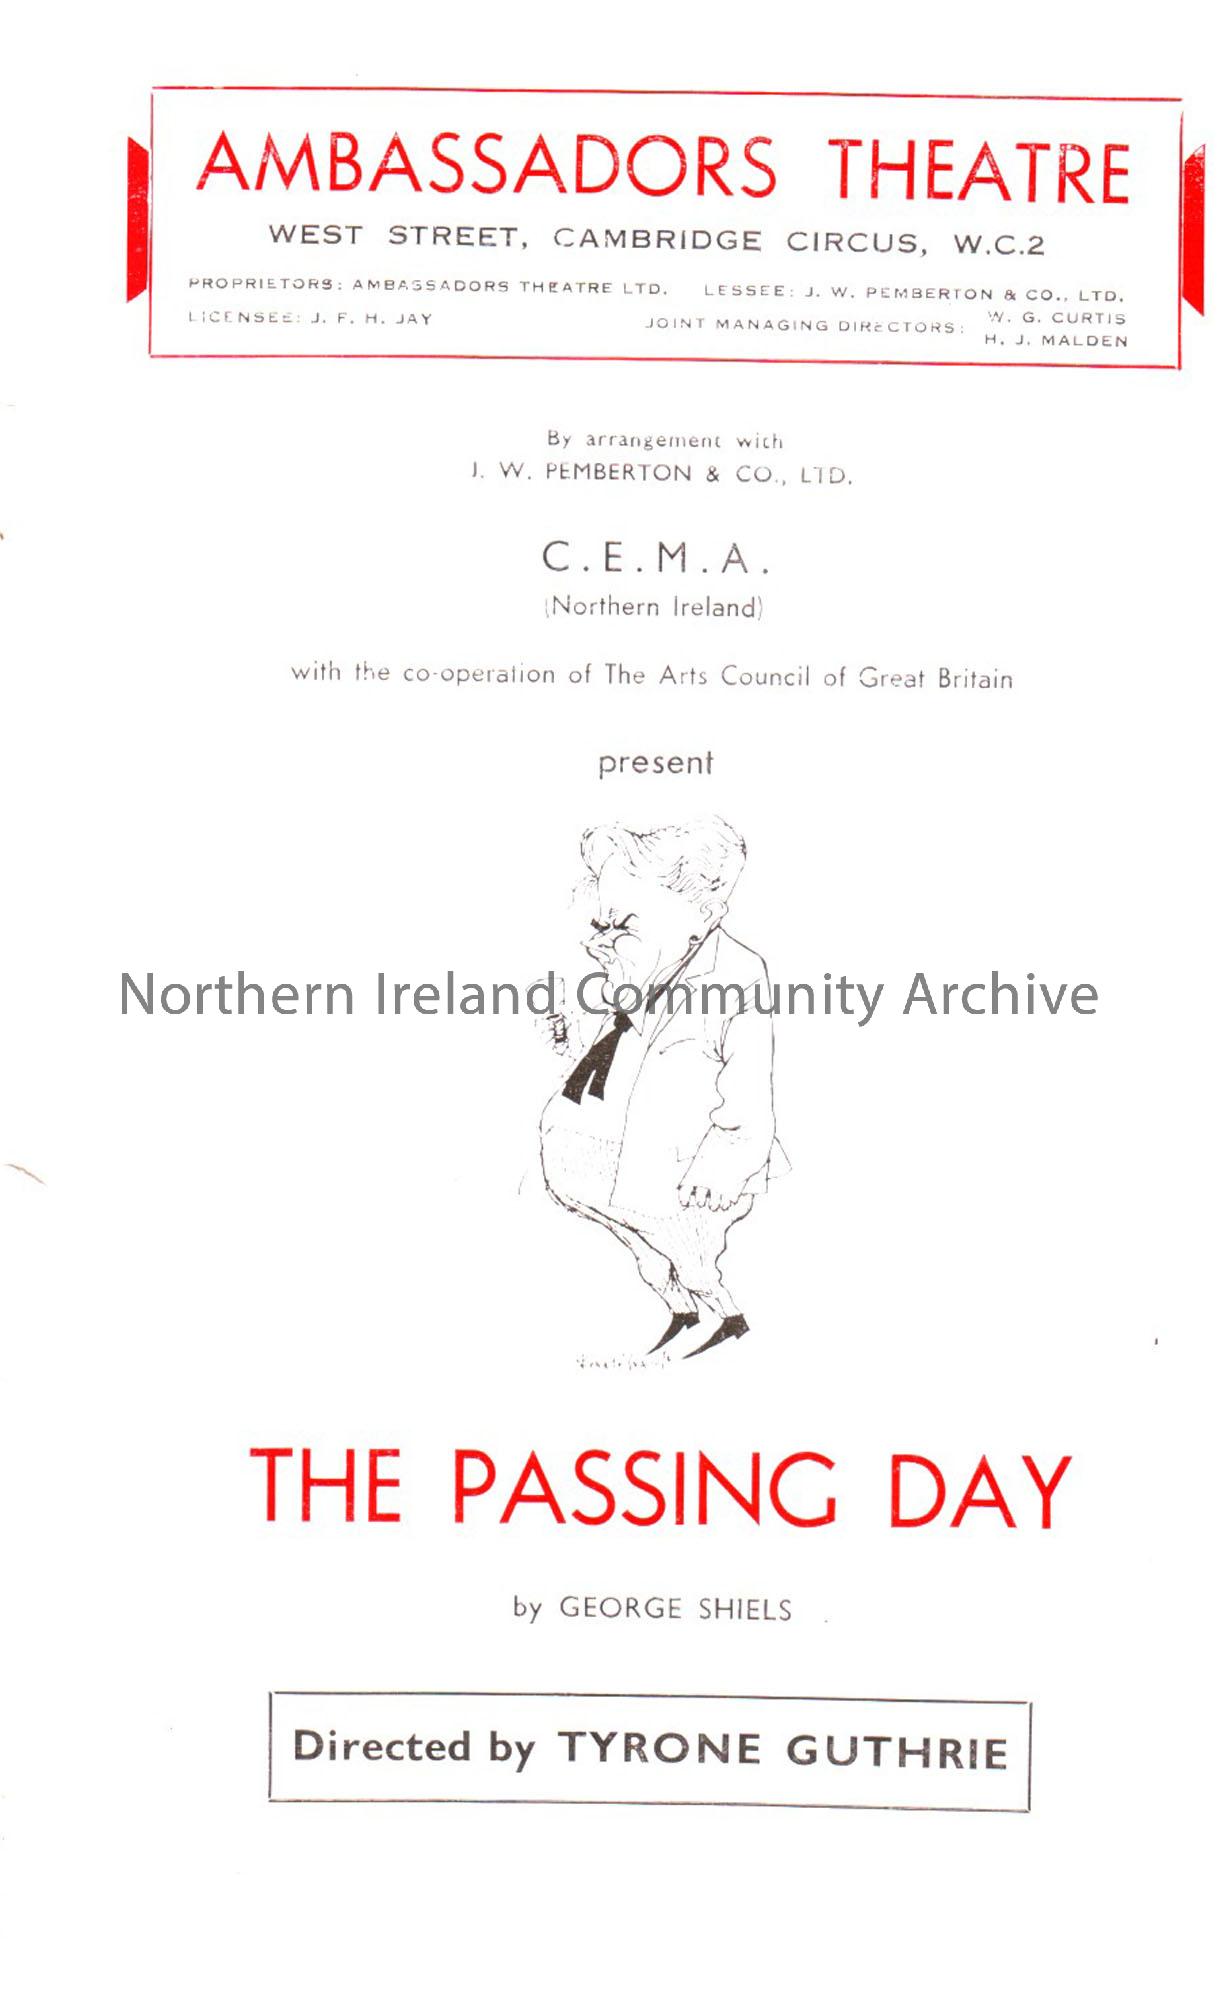 Ambassadors Theatre, West Street, Cambridge Circus. C.E.M.A (Northern Ireland) present ‘The Passing Day’ by George Shiels. Directed by Tyrone Guthrie